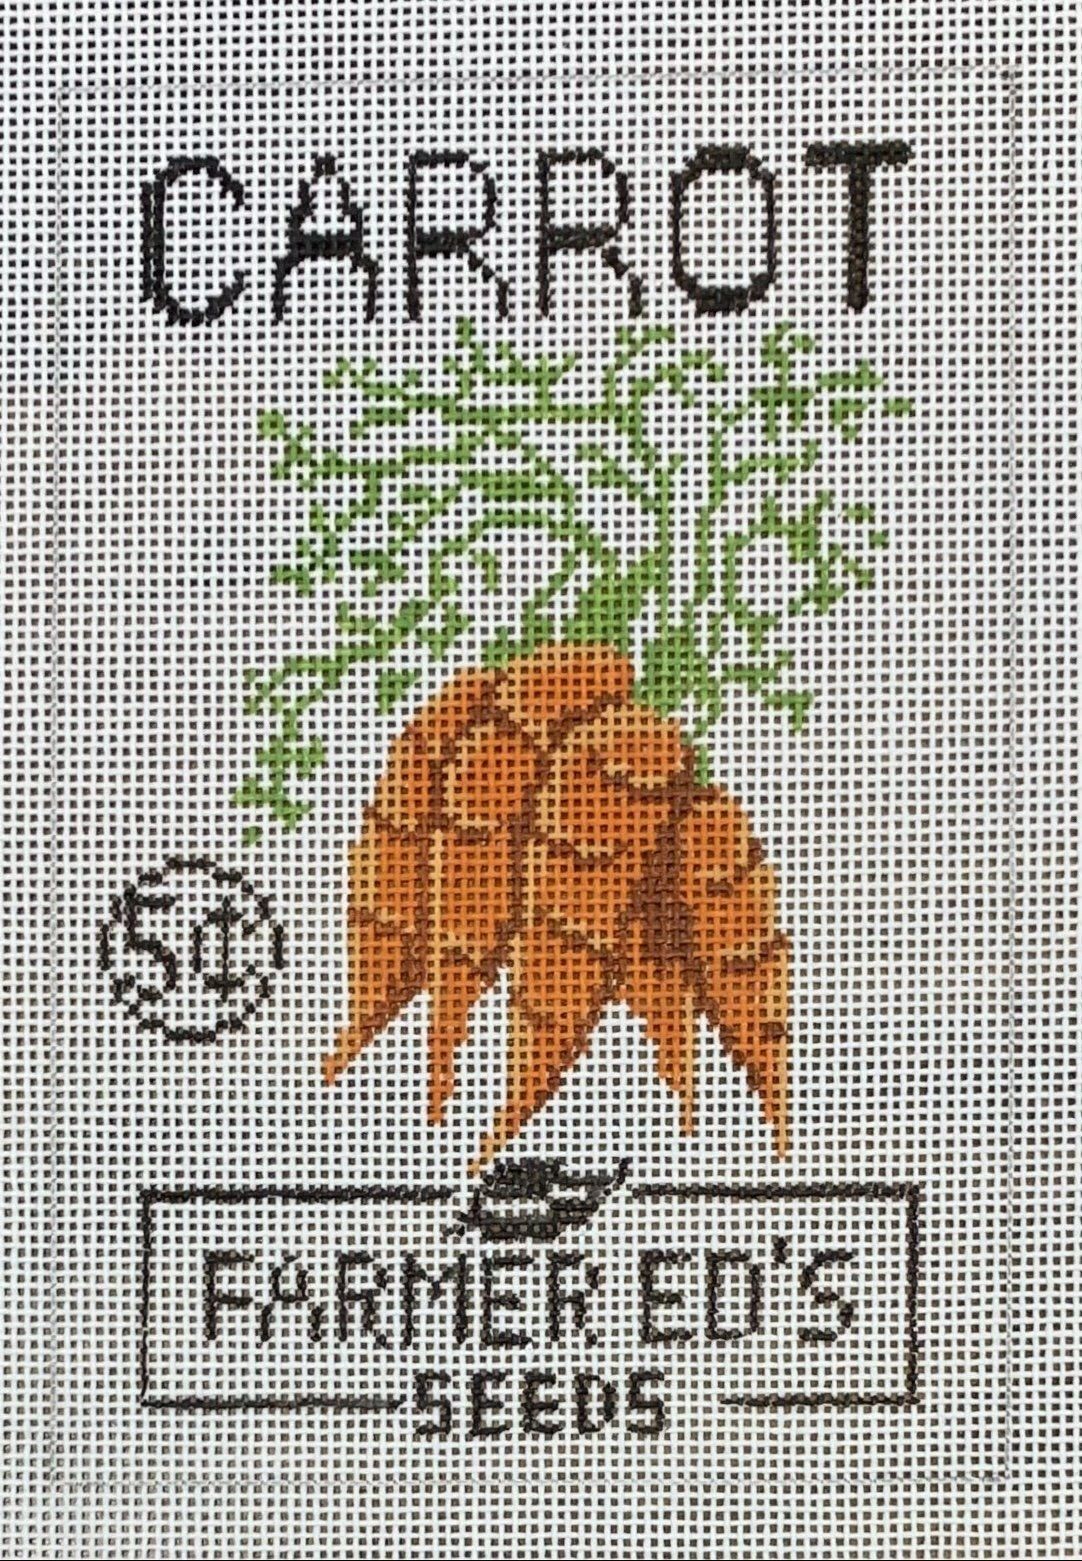 Seed Packet: Carrot